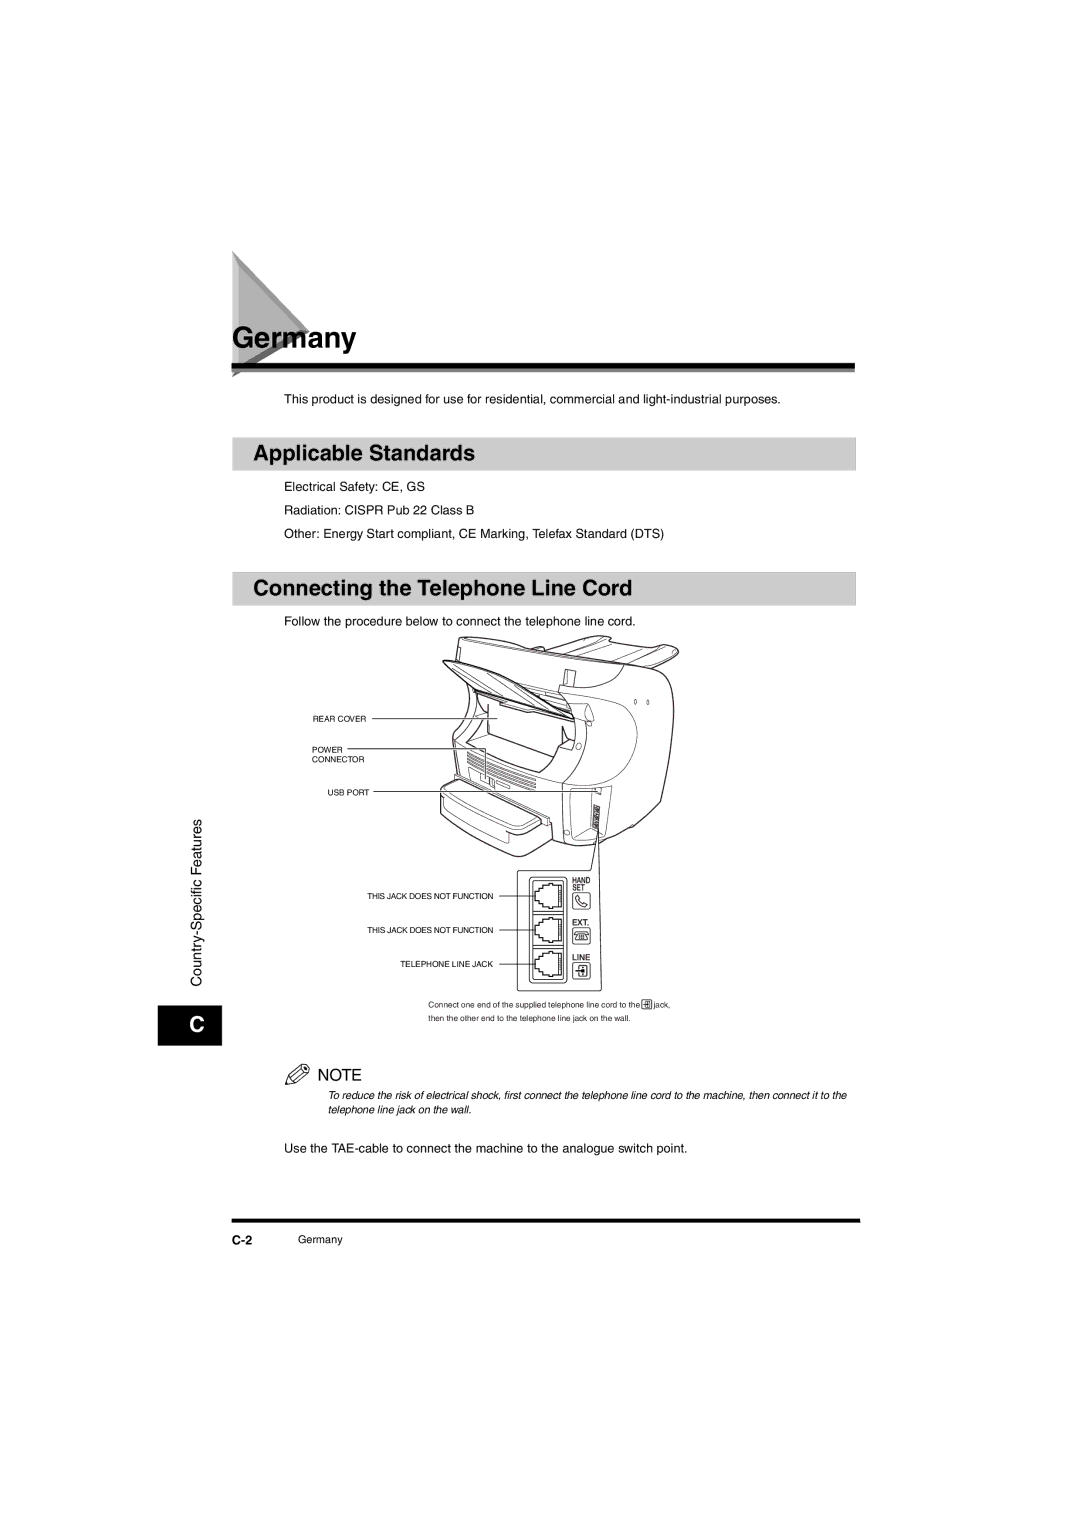 Canon L380S manual Germany, Applicable Standards, Connecting the Telephone Line Cord 